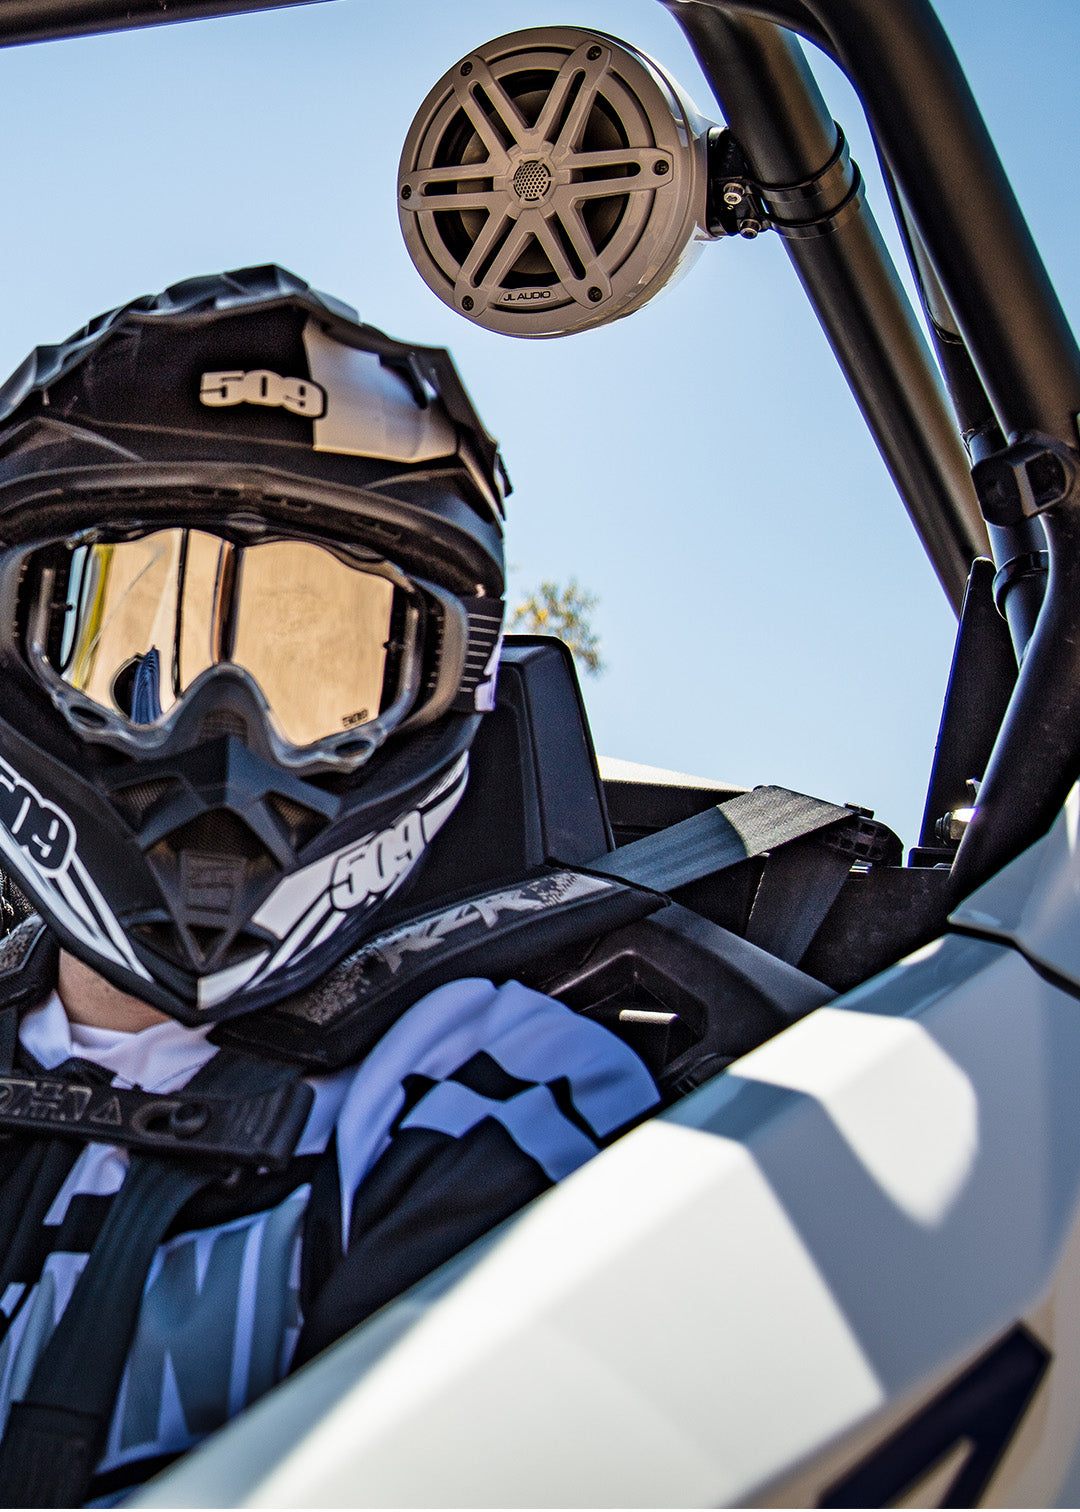 A powersports driver with helmet and gear sitting in a vehicle with install VeX audio system.